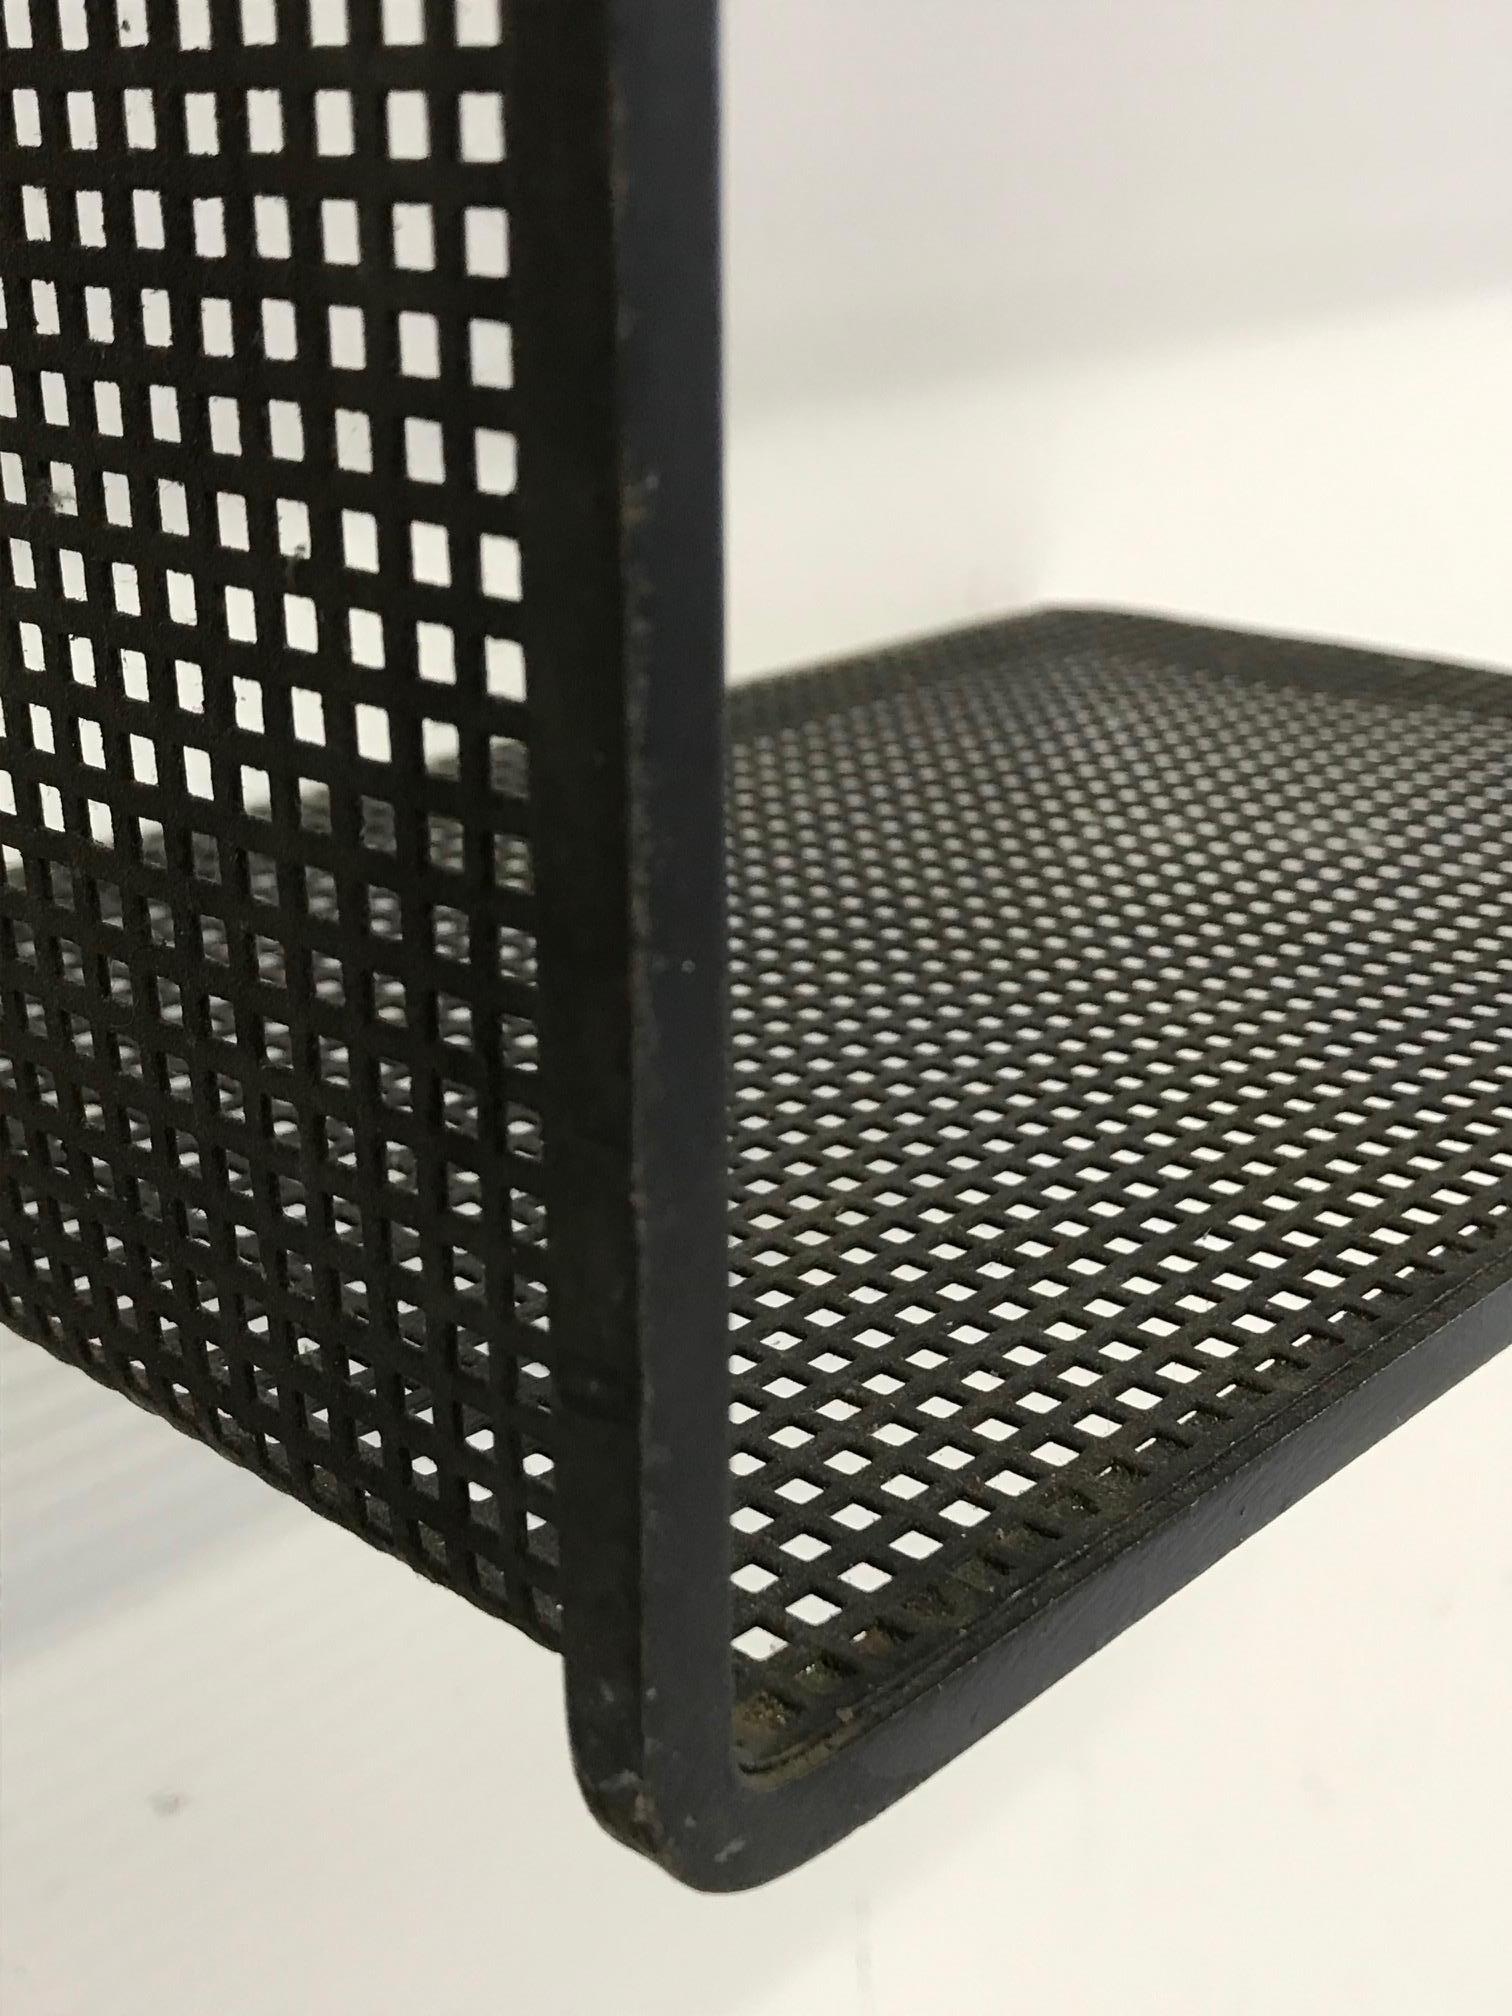 Mid-20th Century Dedal Wall Shelf by Mathieu Mategot, Perforated Steel, France, circa 1955